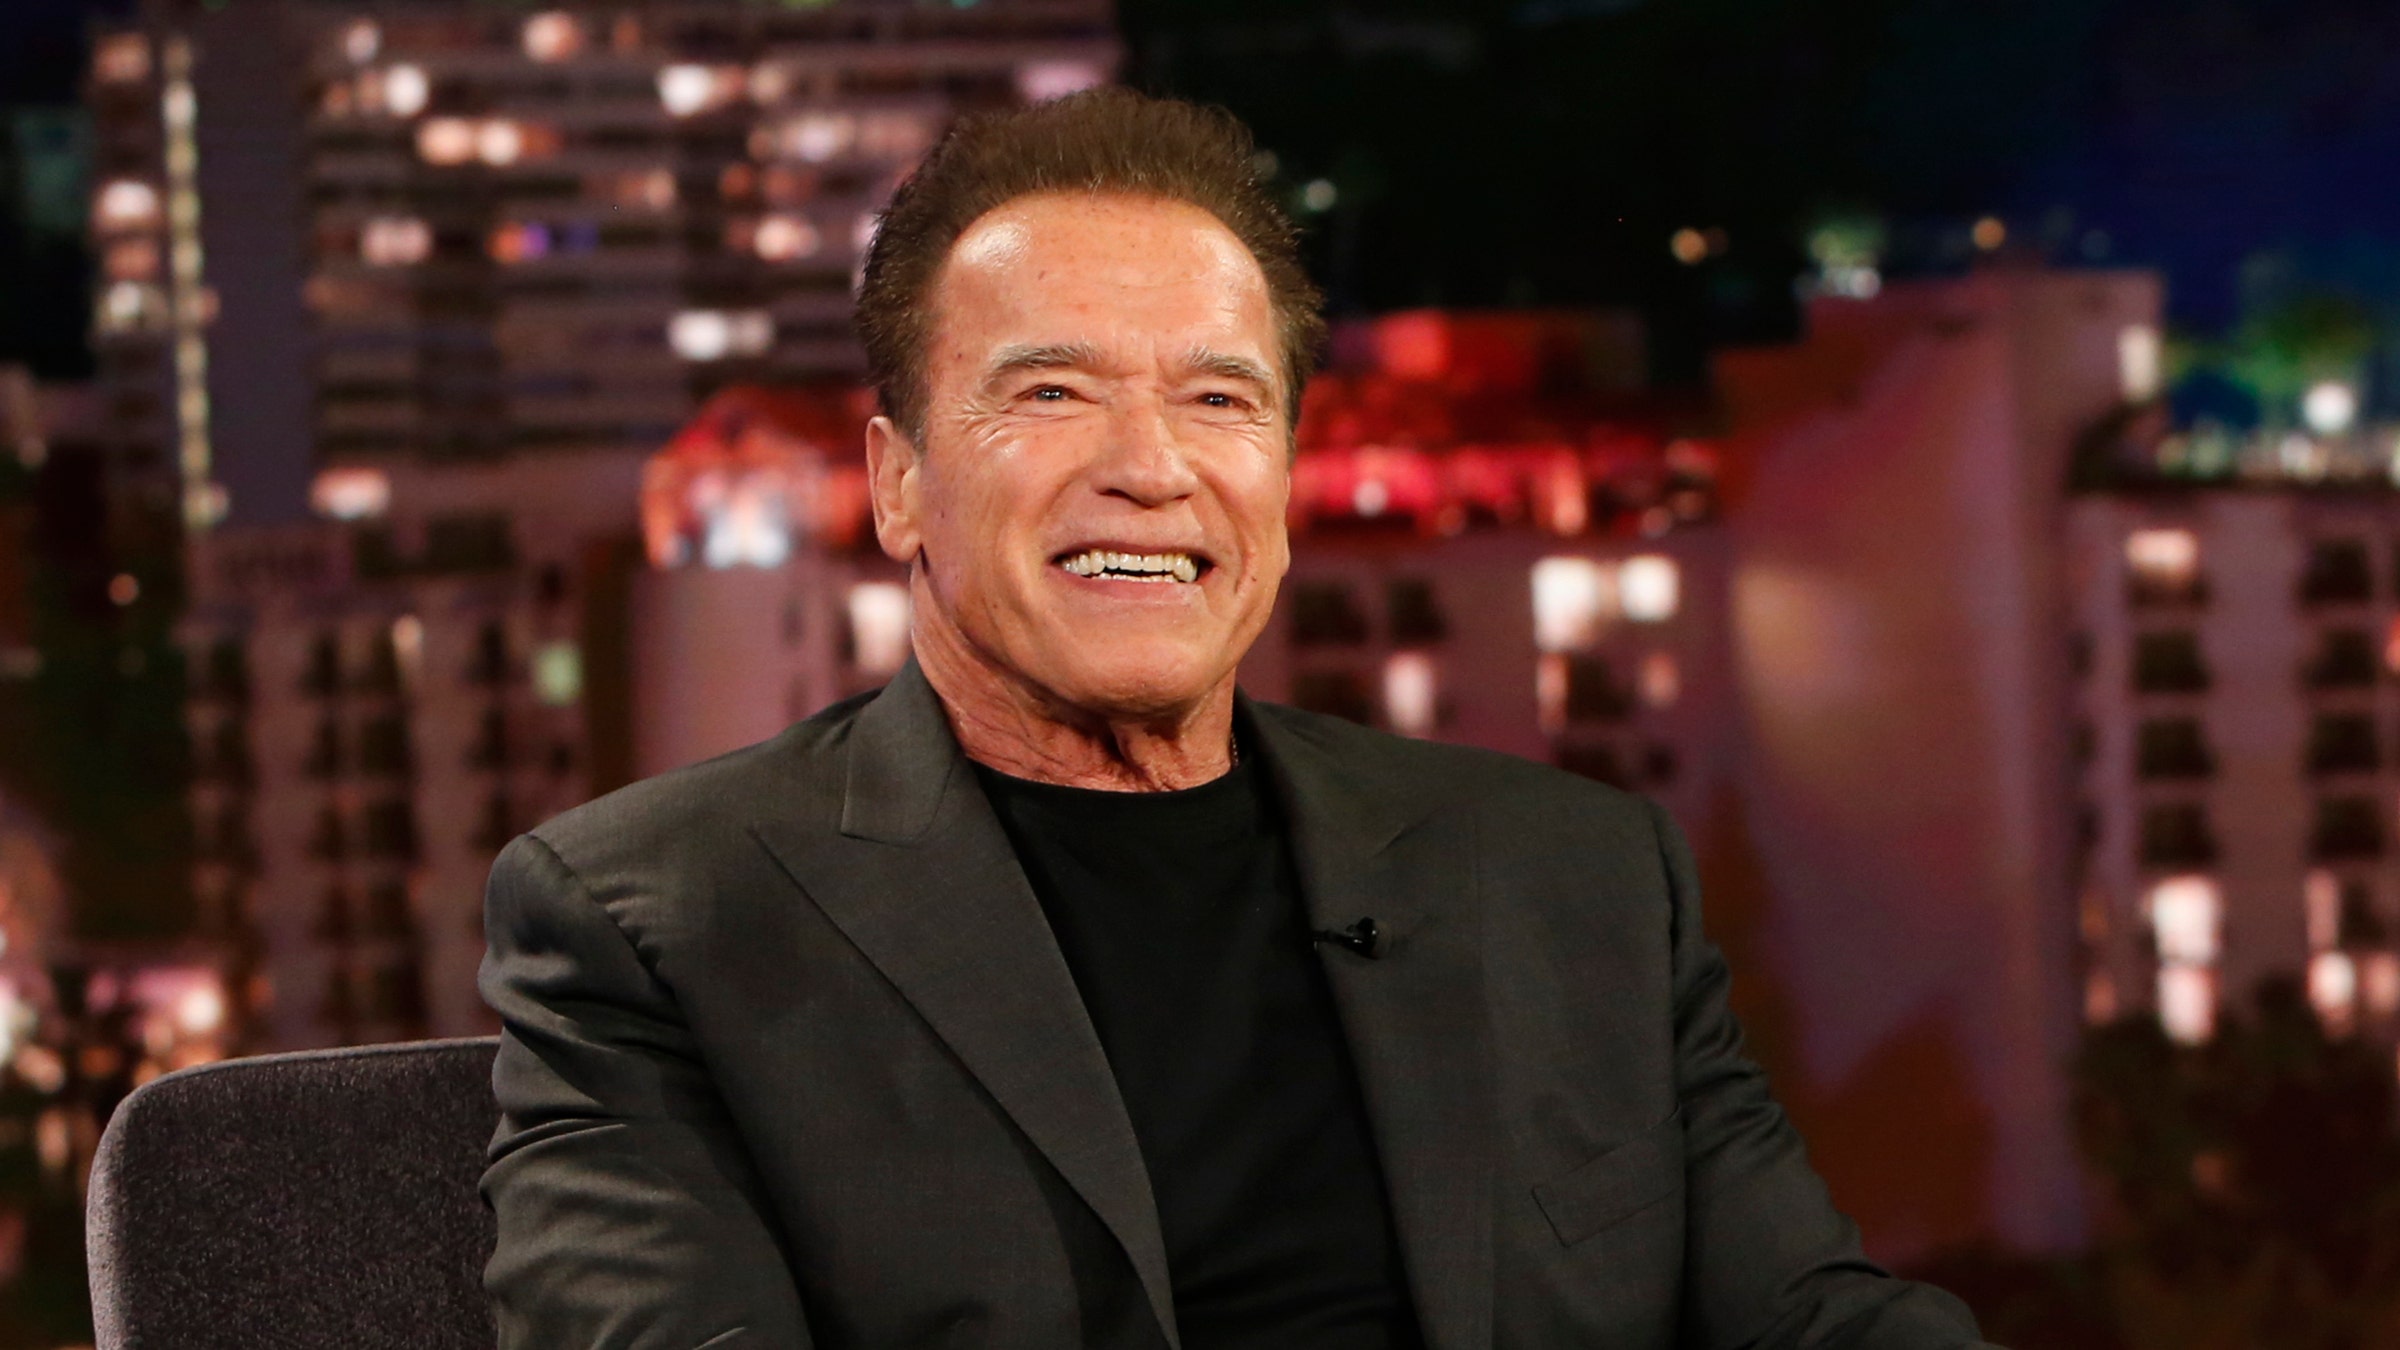 Arnold Schwarzenegger says his children 'hated' his job as governor in interview with daughter Katherine